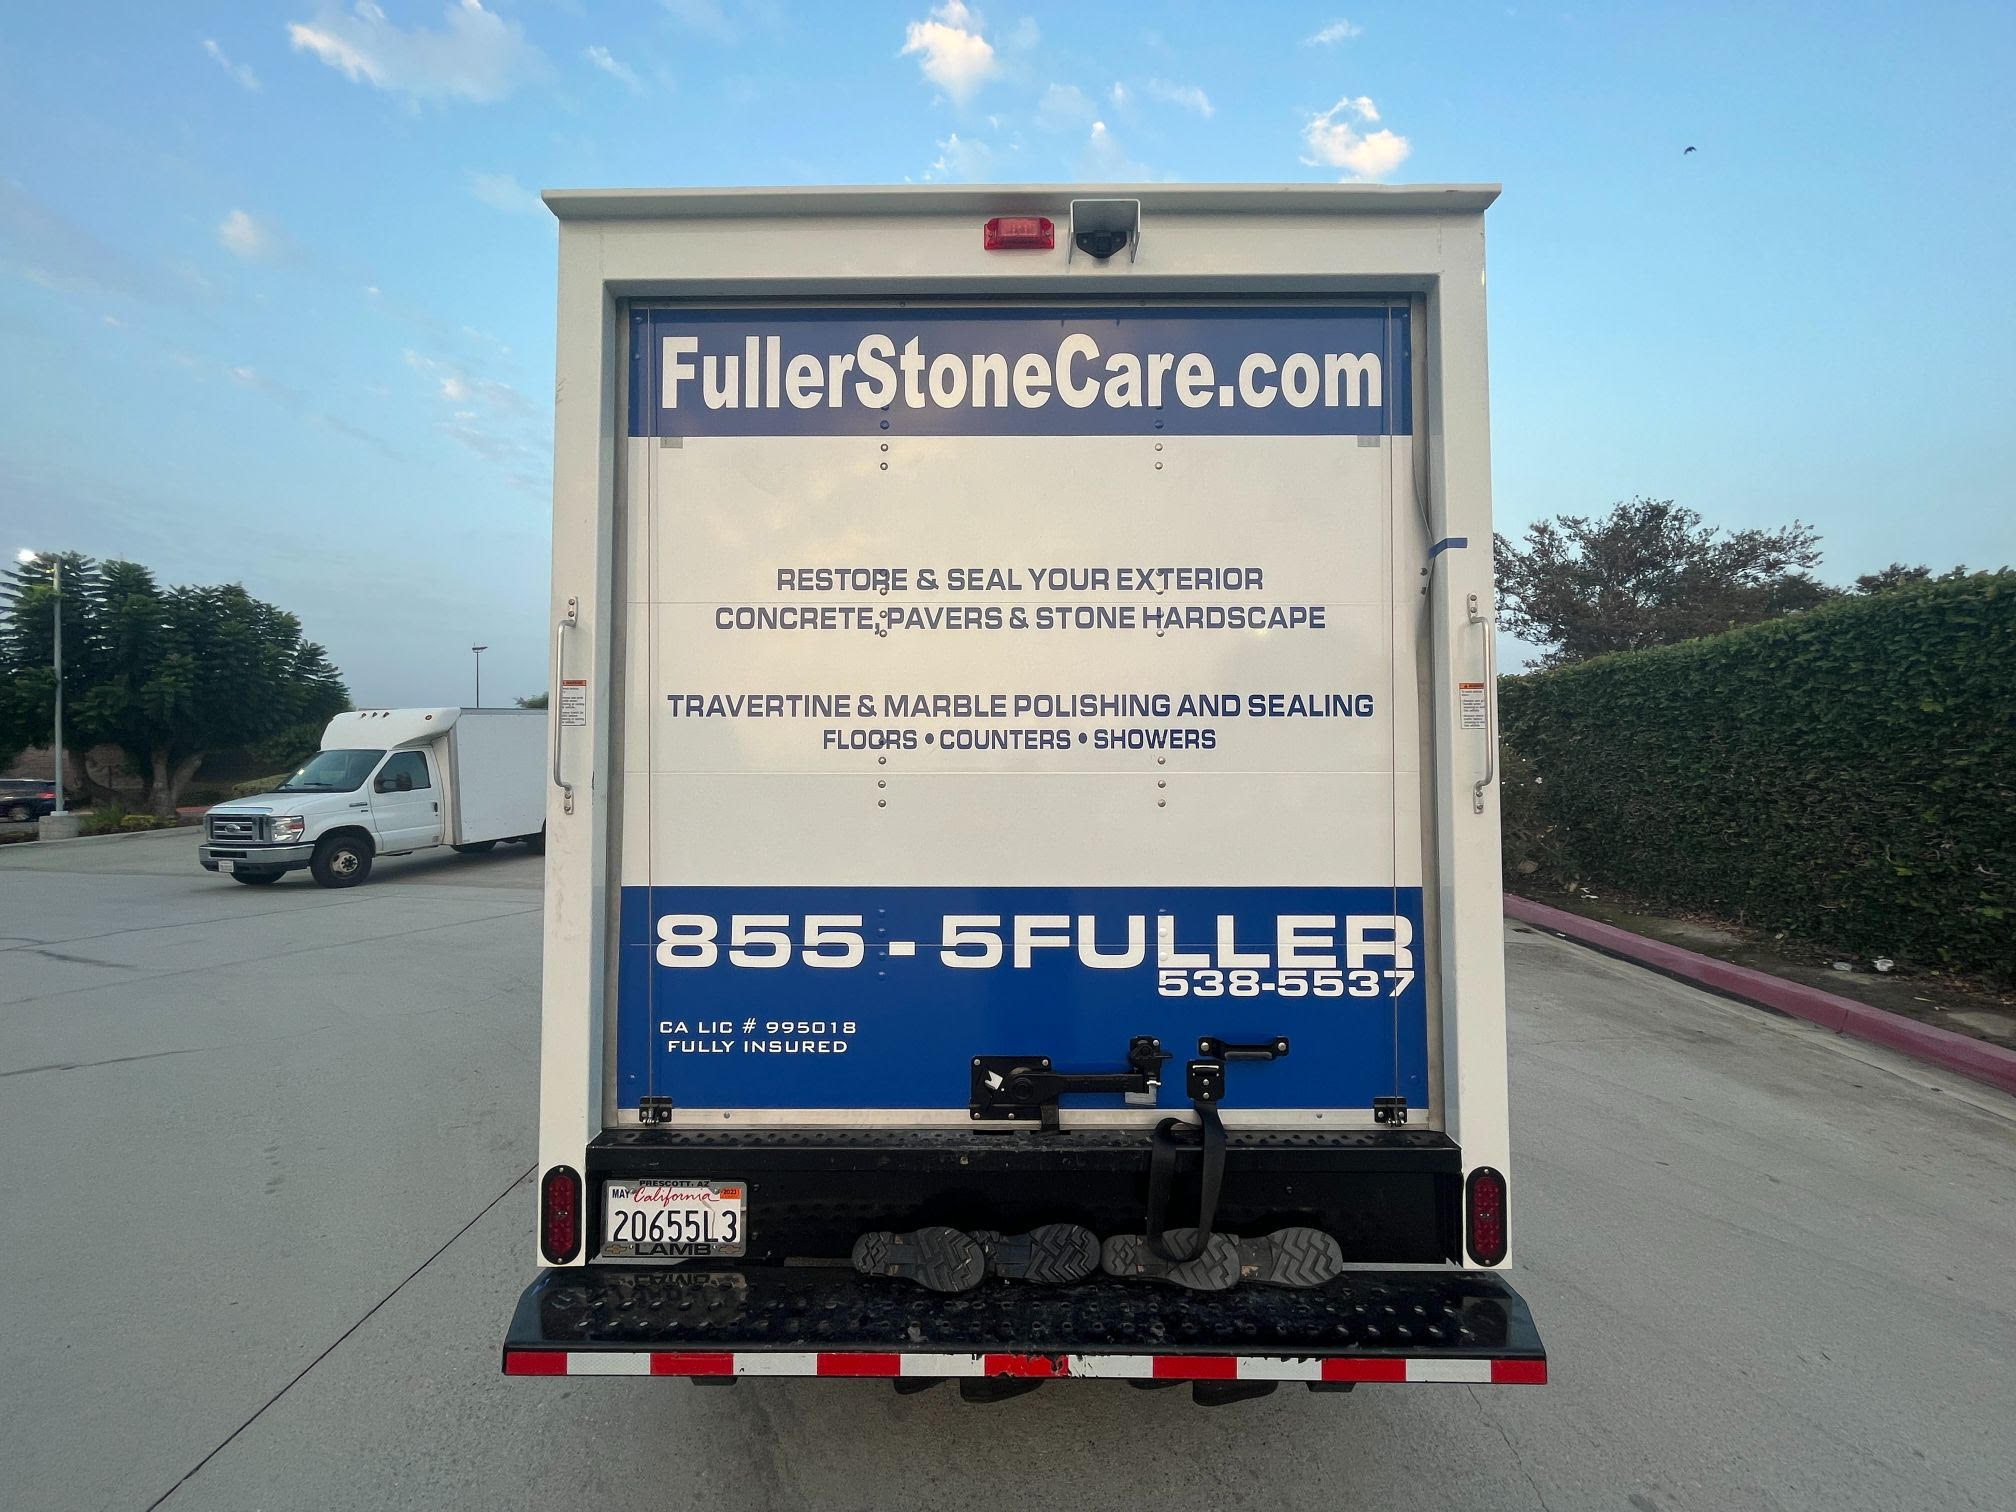 Commercial Box Truck Wraps Graphics Advertise for Businesses in Orange County